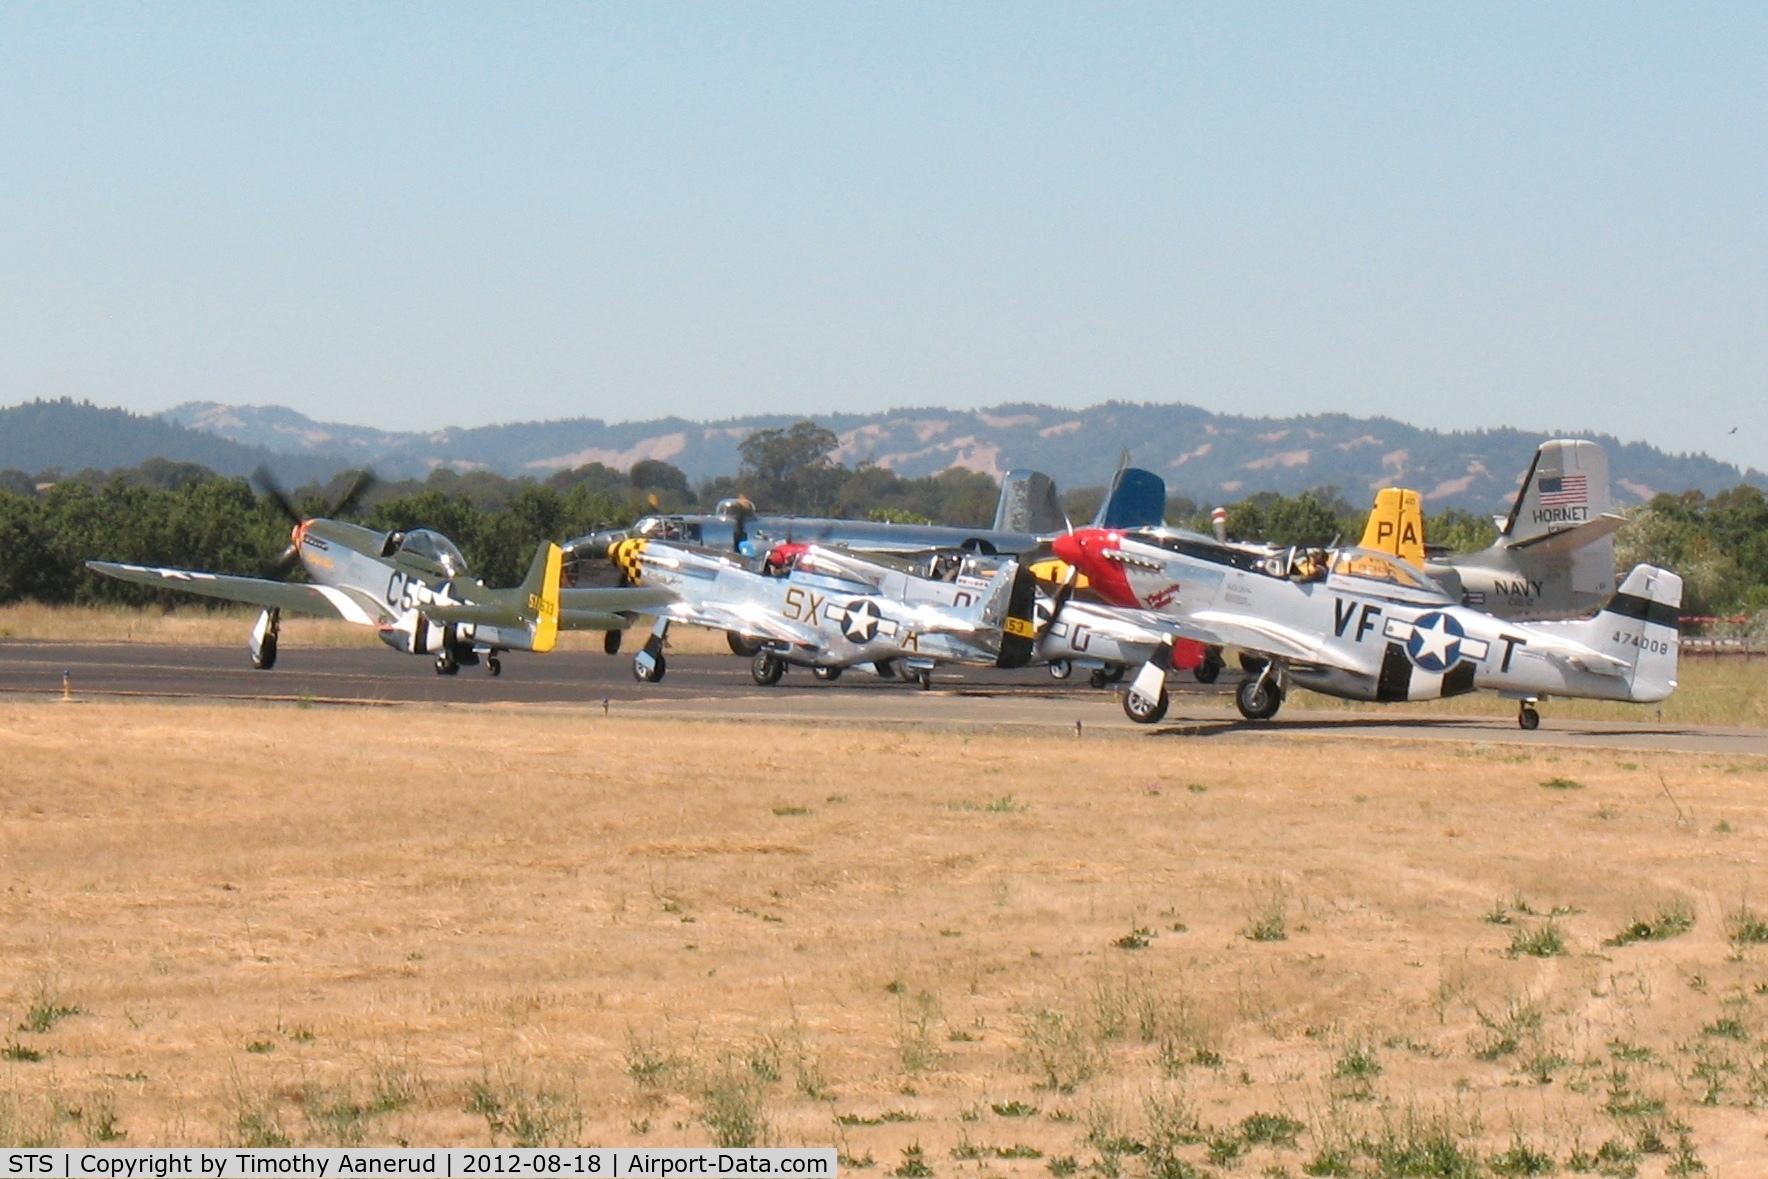 Charles M. Schulz - Sonoma County Airport (STS) - Wings over Wing Country airshow